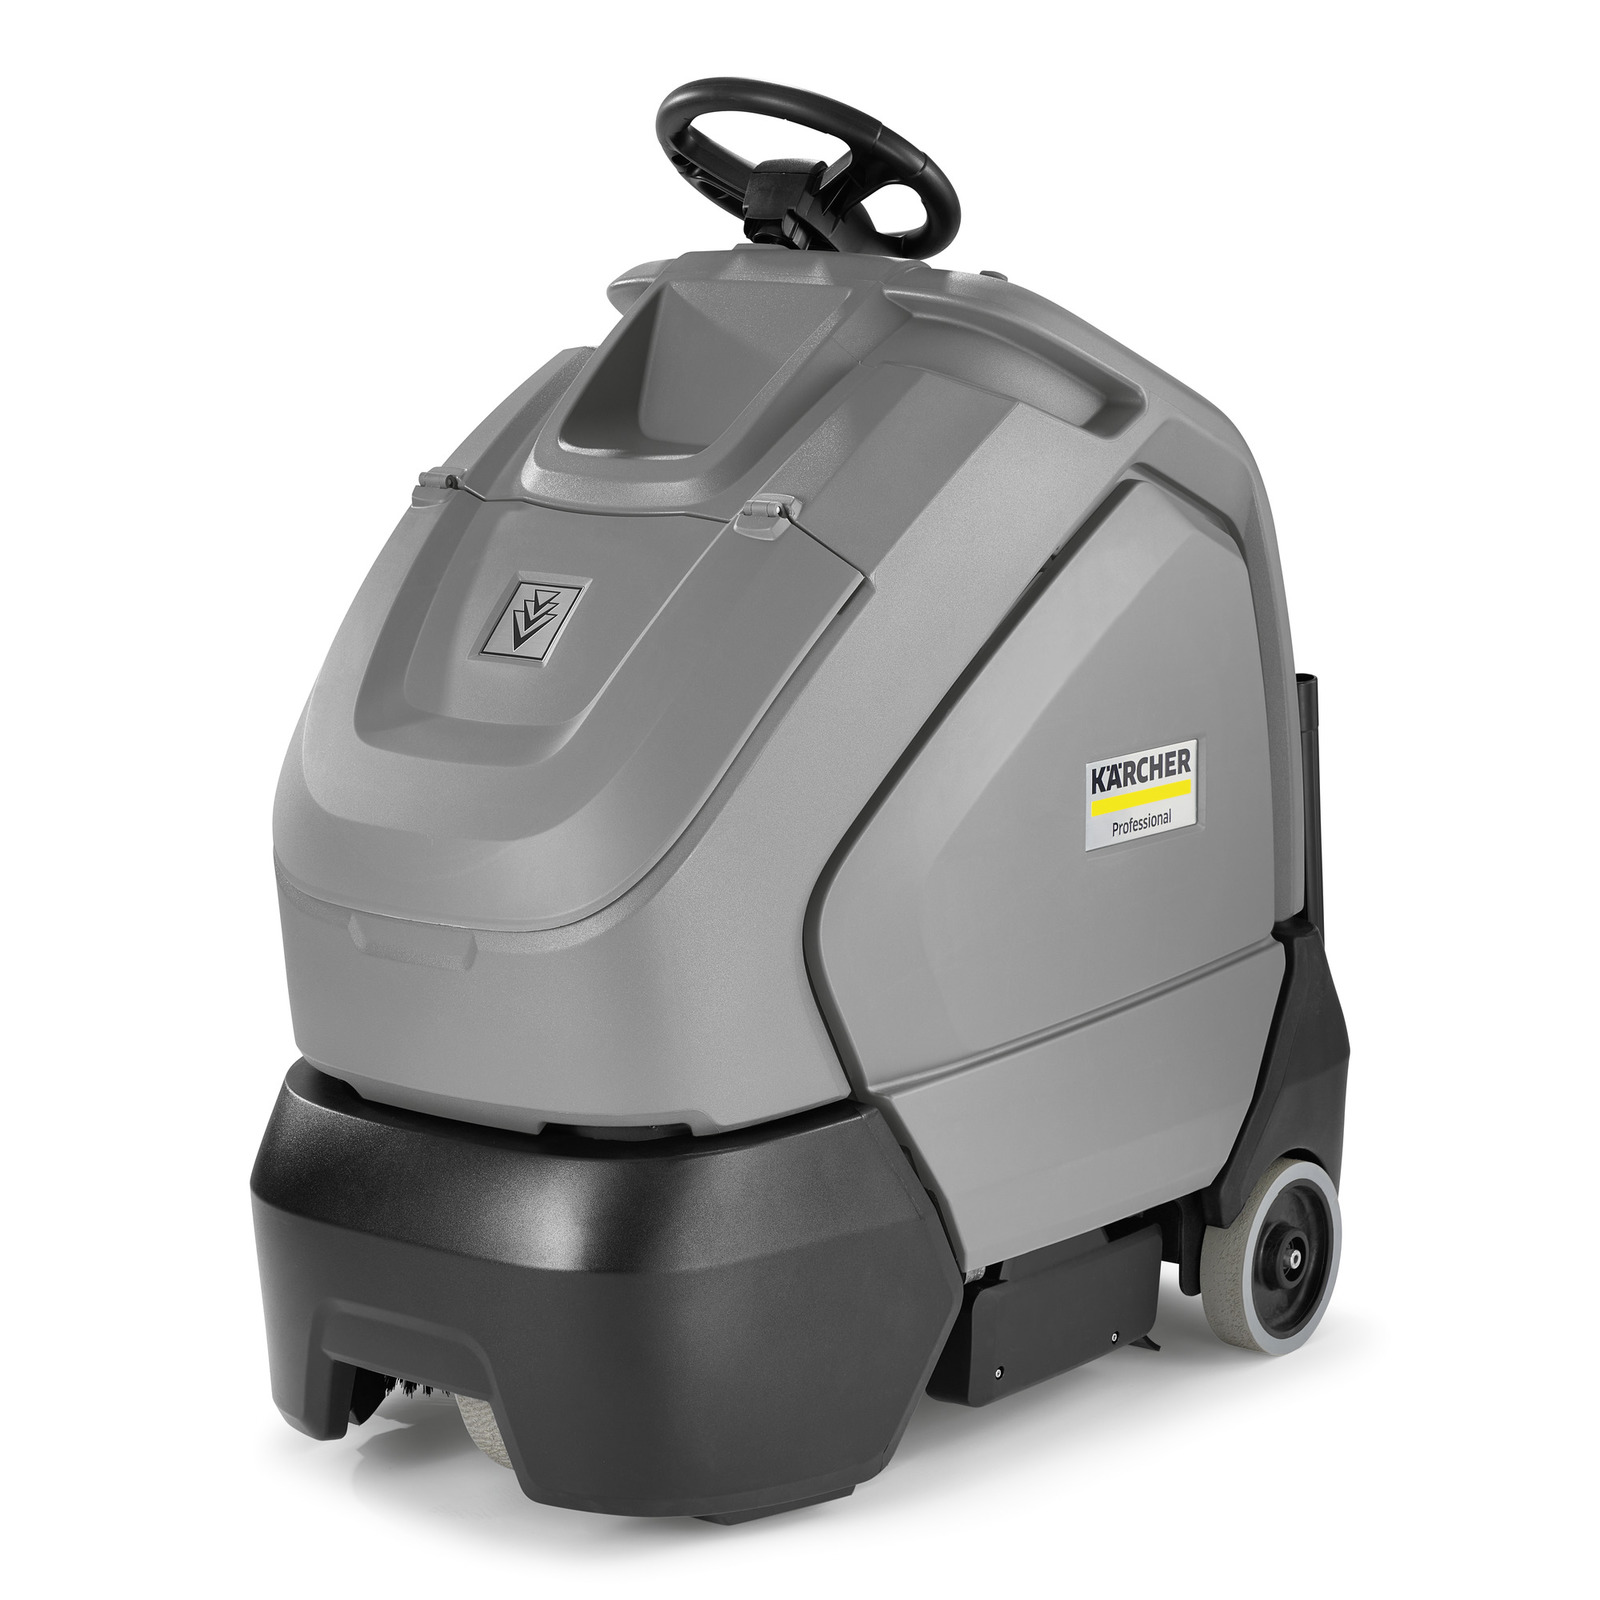 Karcher Chariot CV 60/1 RS BP Deluxe windsor, karcher, chariot, 3, CV, 86/1, wide, area, riding, ride-on, professional, commercial, powerful, vacuum, industrial, 